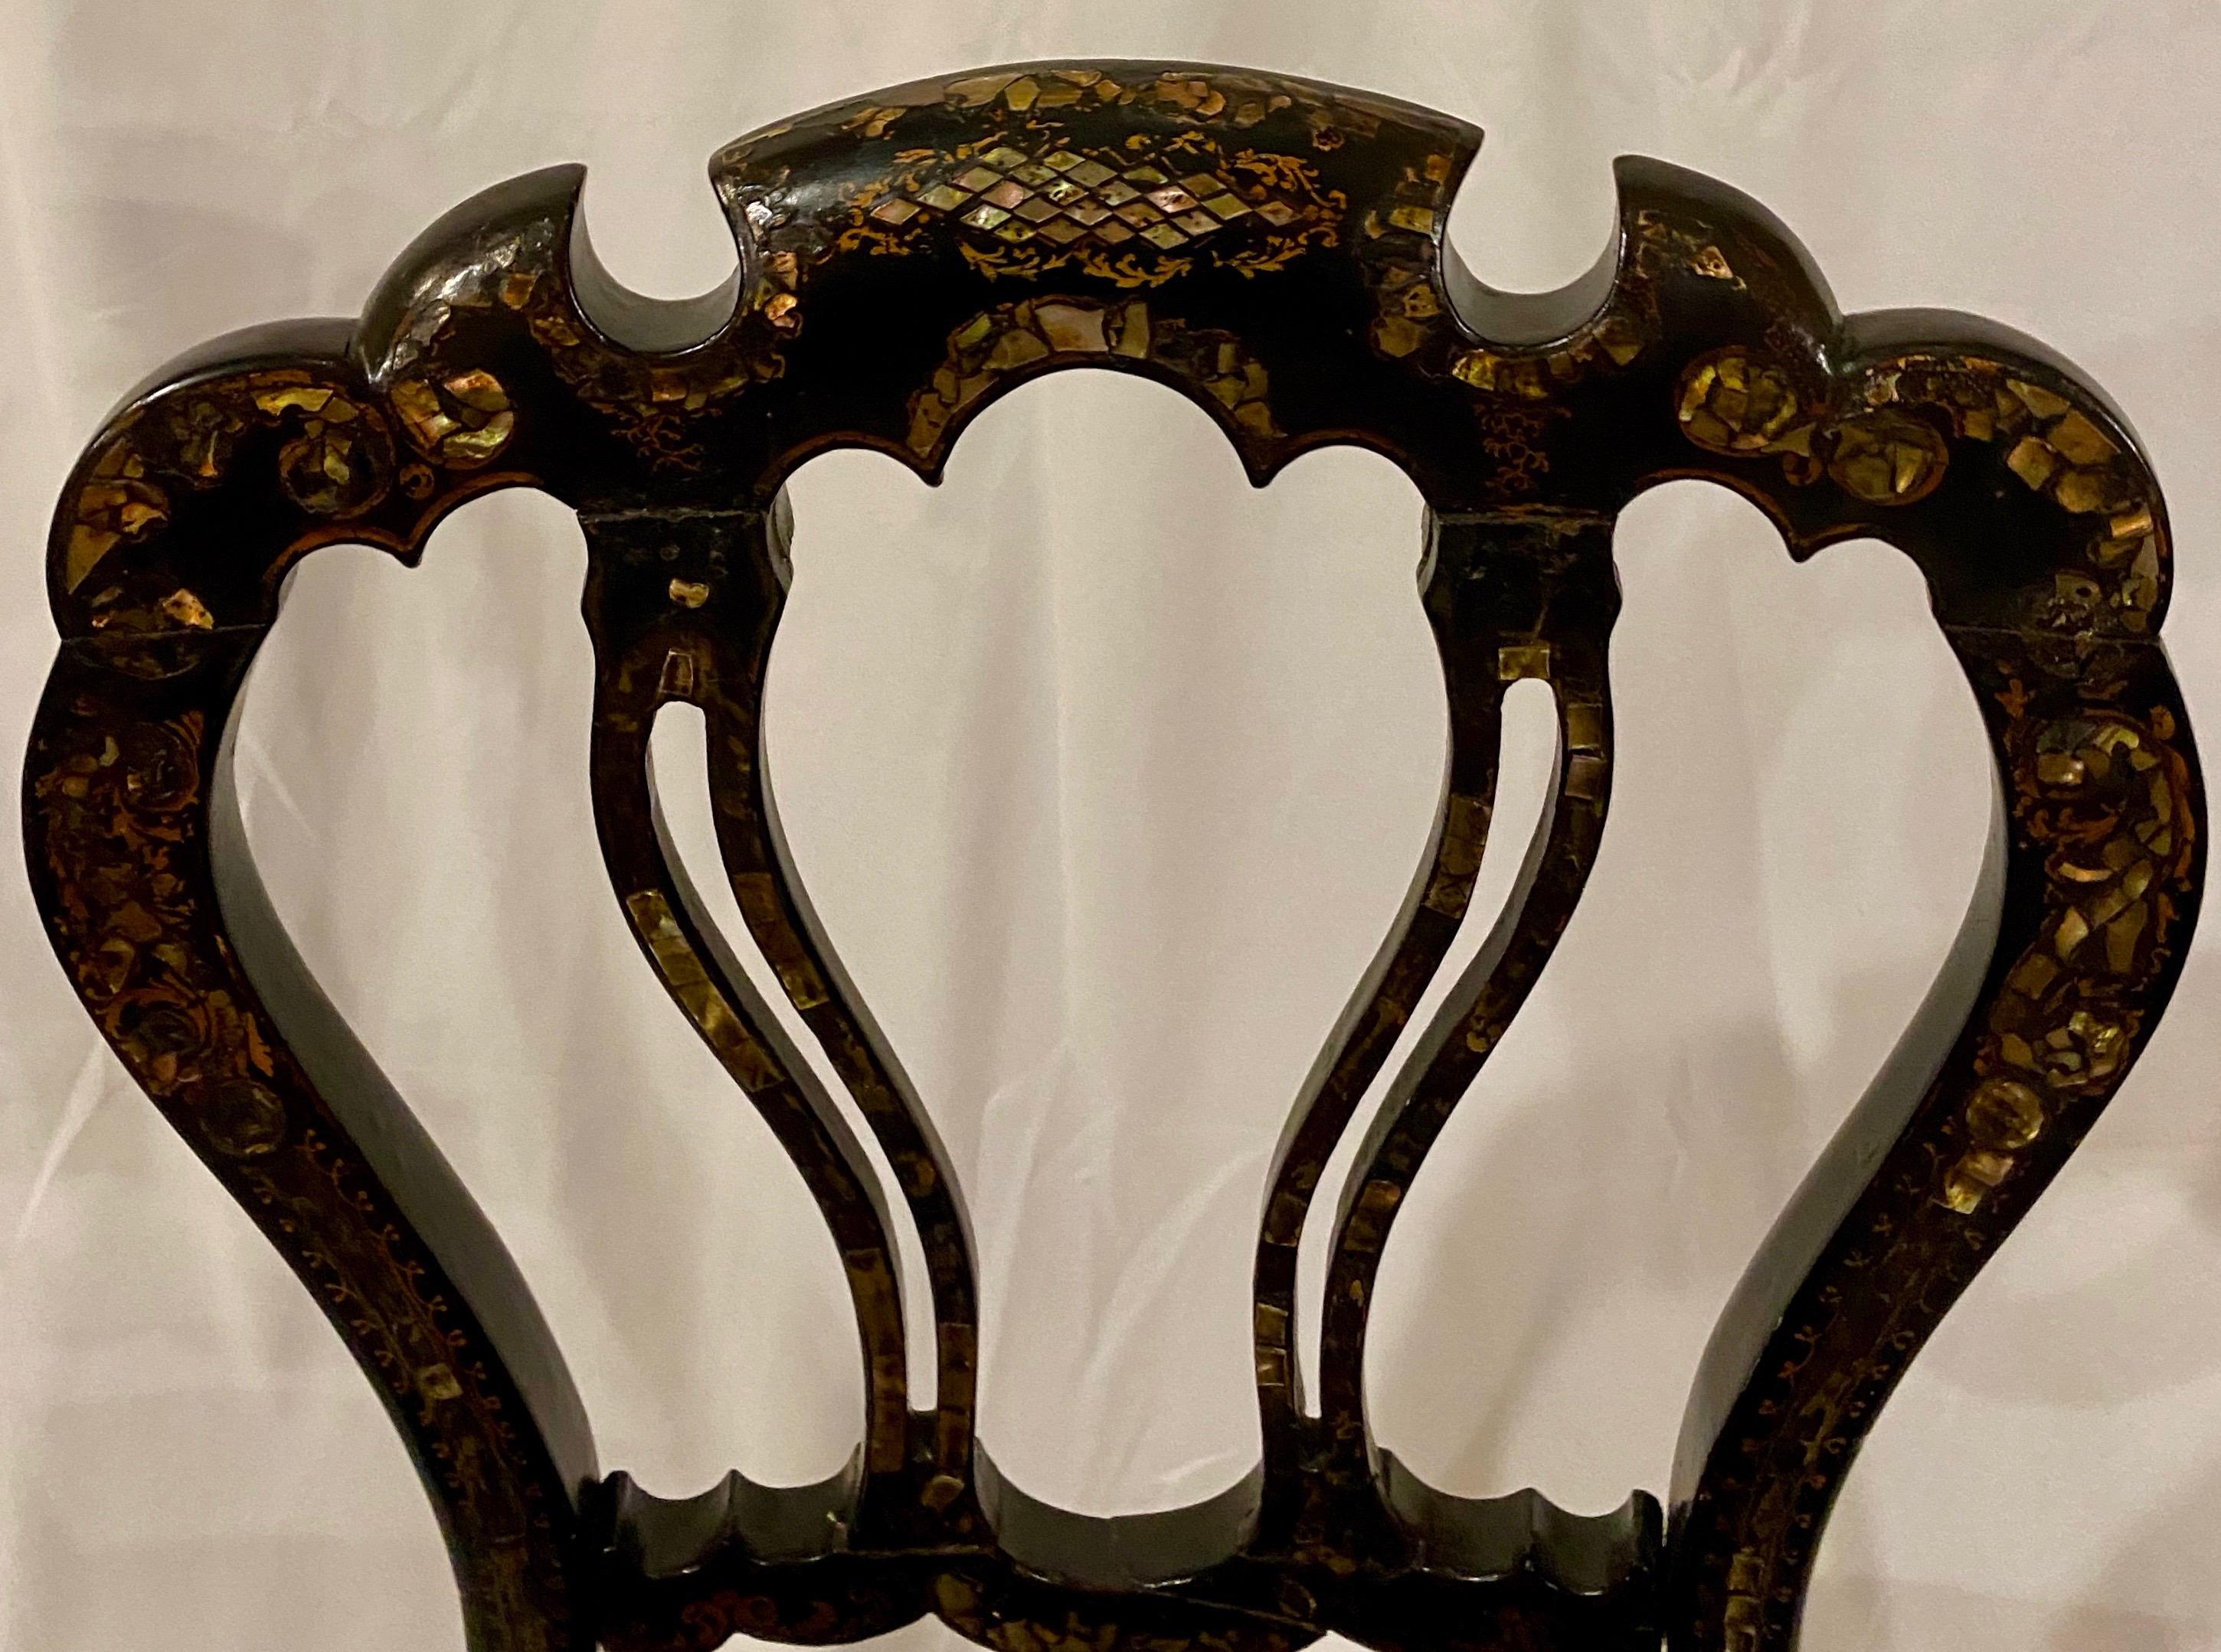 Antique Mid-19th Century Lacquer Side Chairs with Mother of Pearl Inlay In Good Condition For Sale In New Orleans, LA